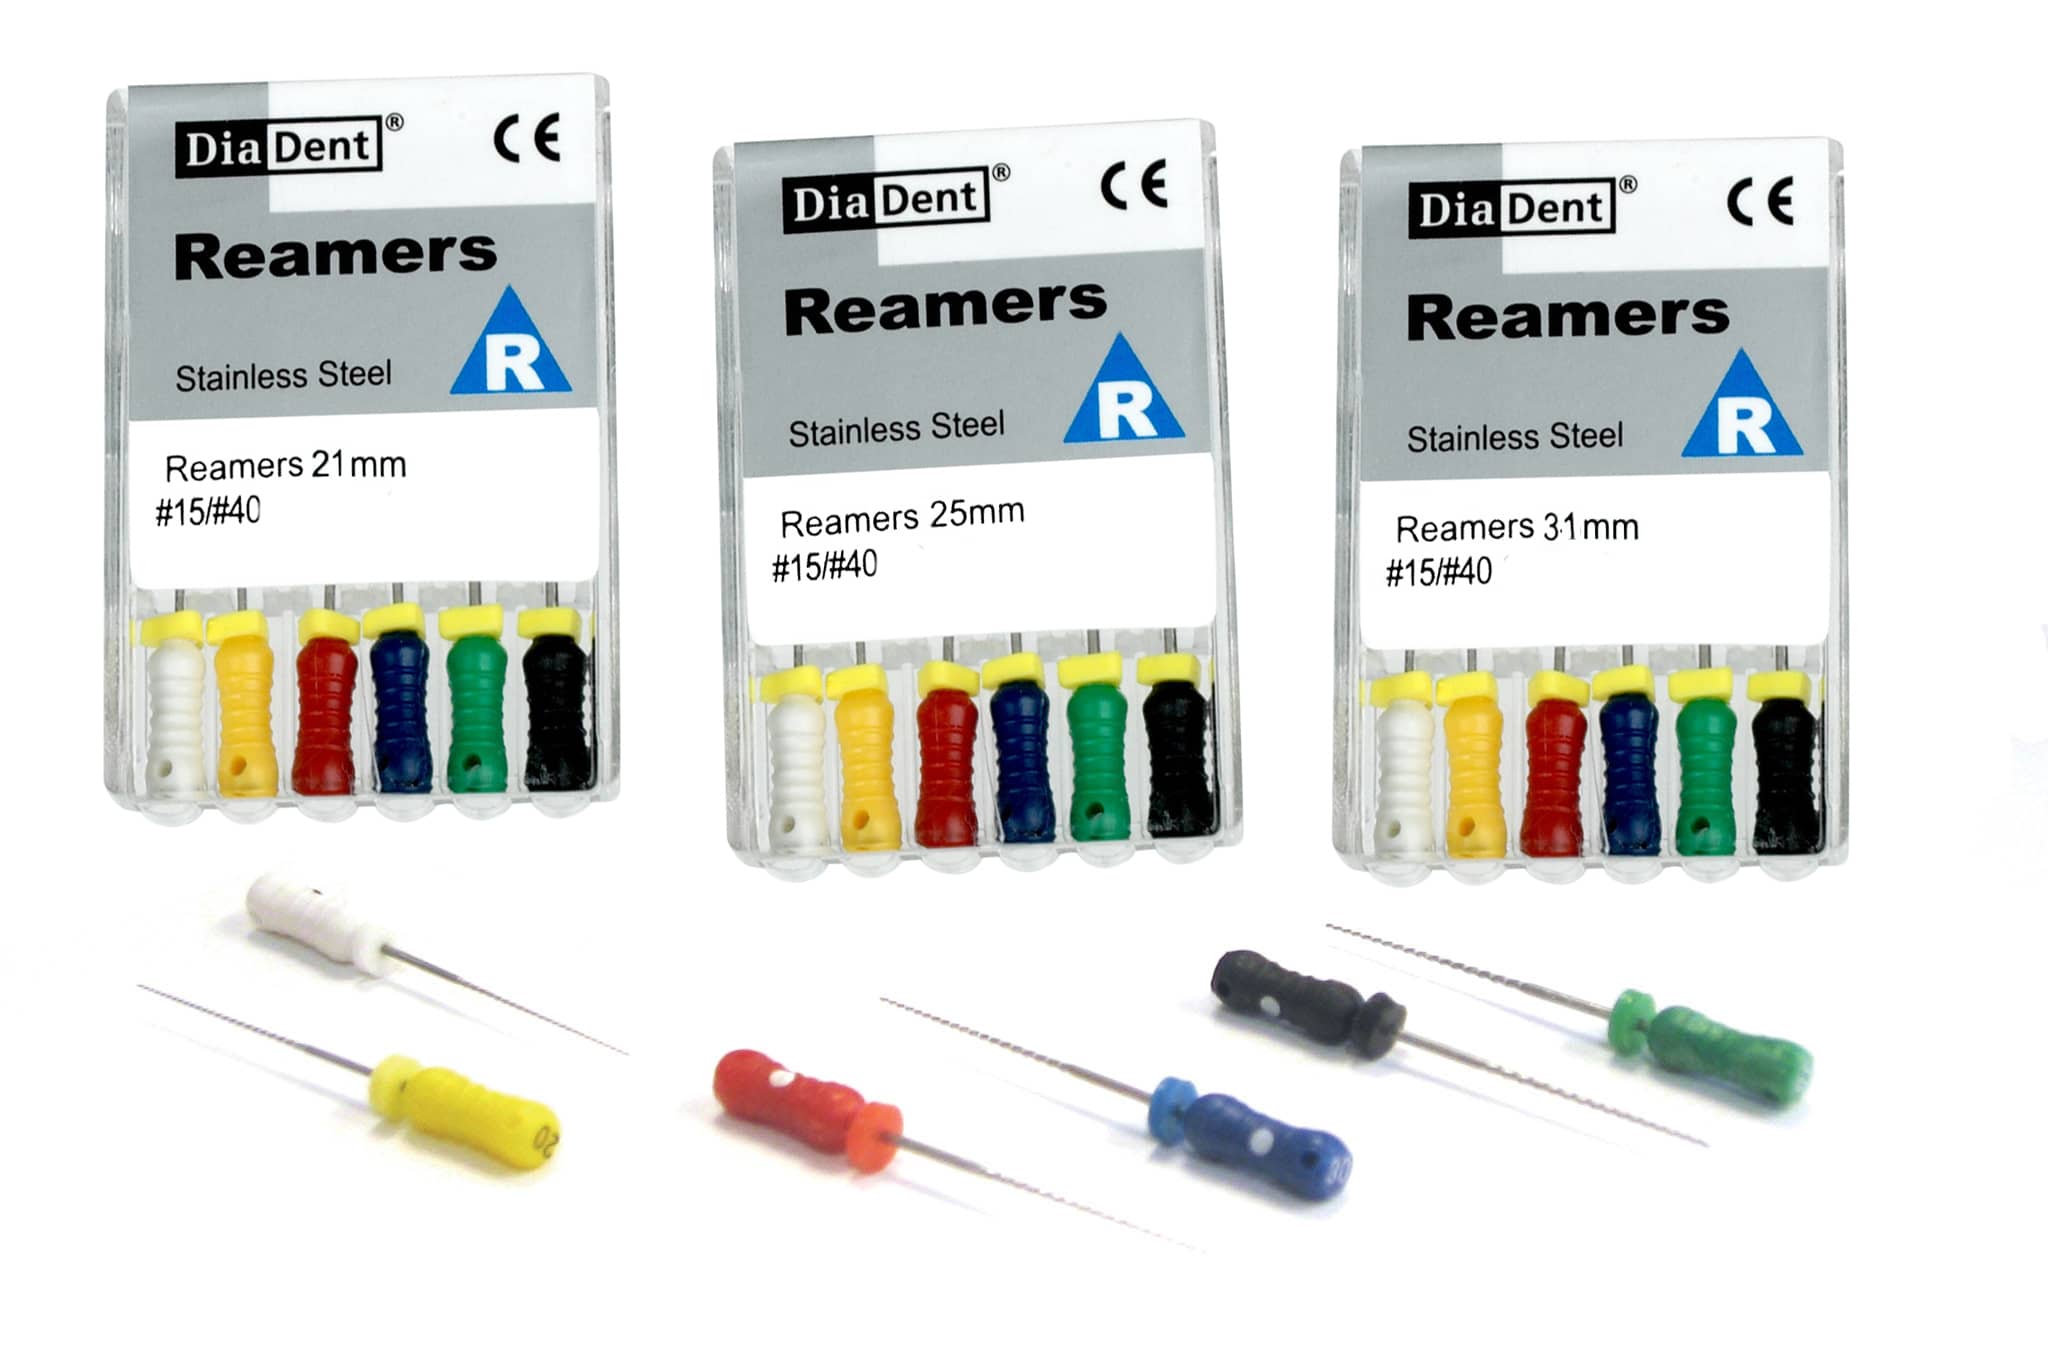 REAMERS Diadent 25mm - 15